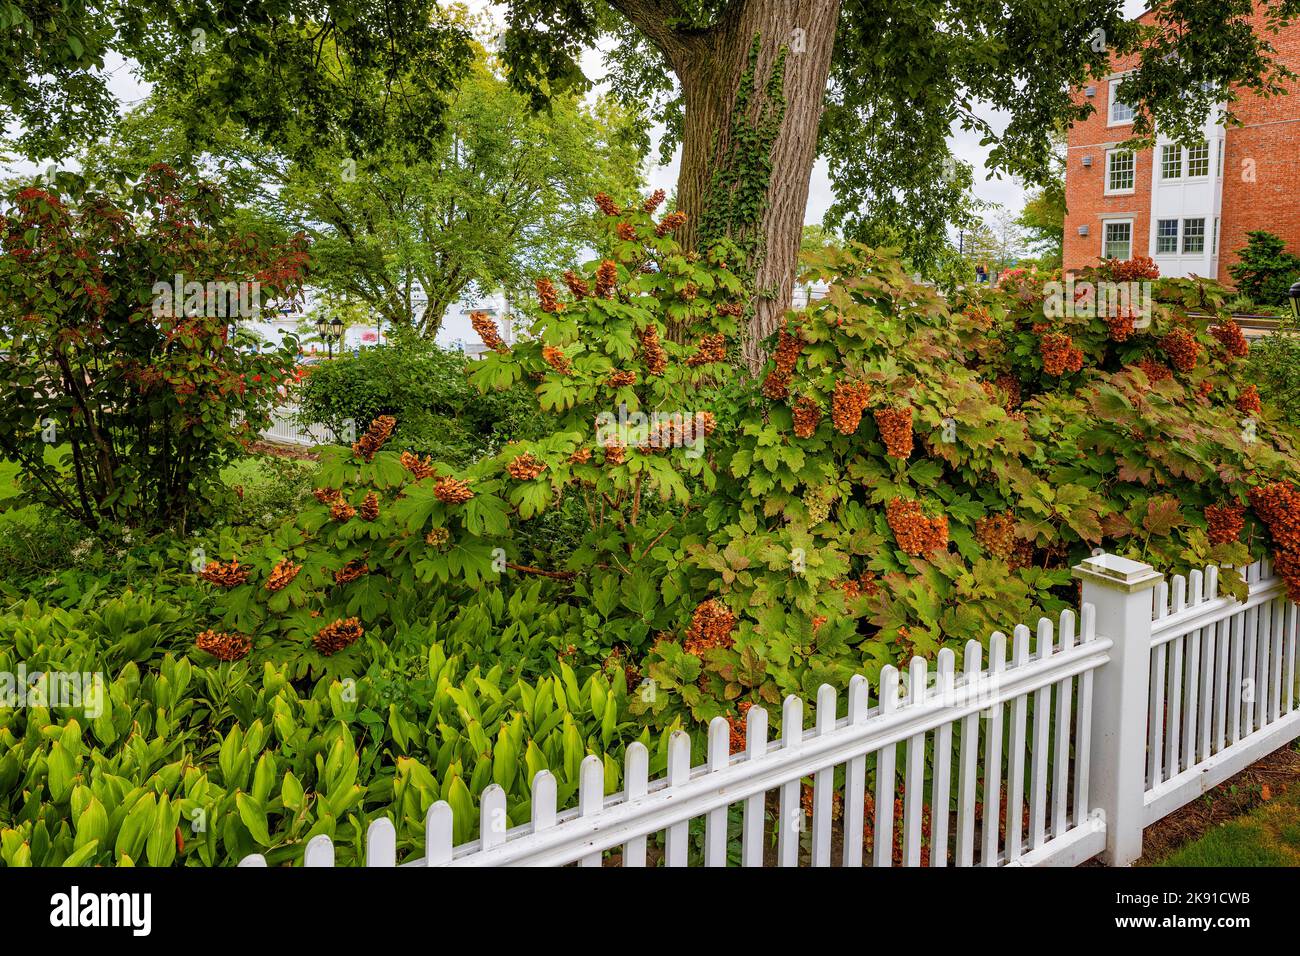 White picket fence with flowering shrubs in a garden setting lining a sidewalk. Stock Photo